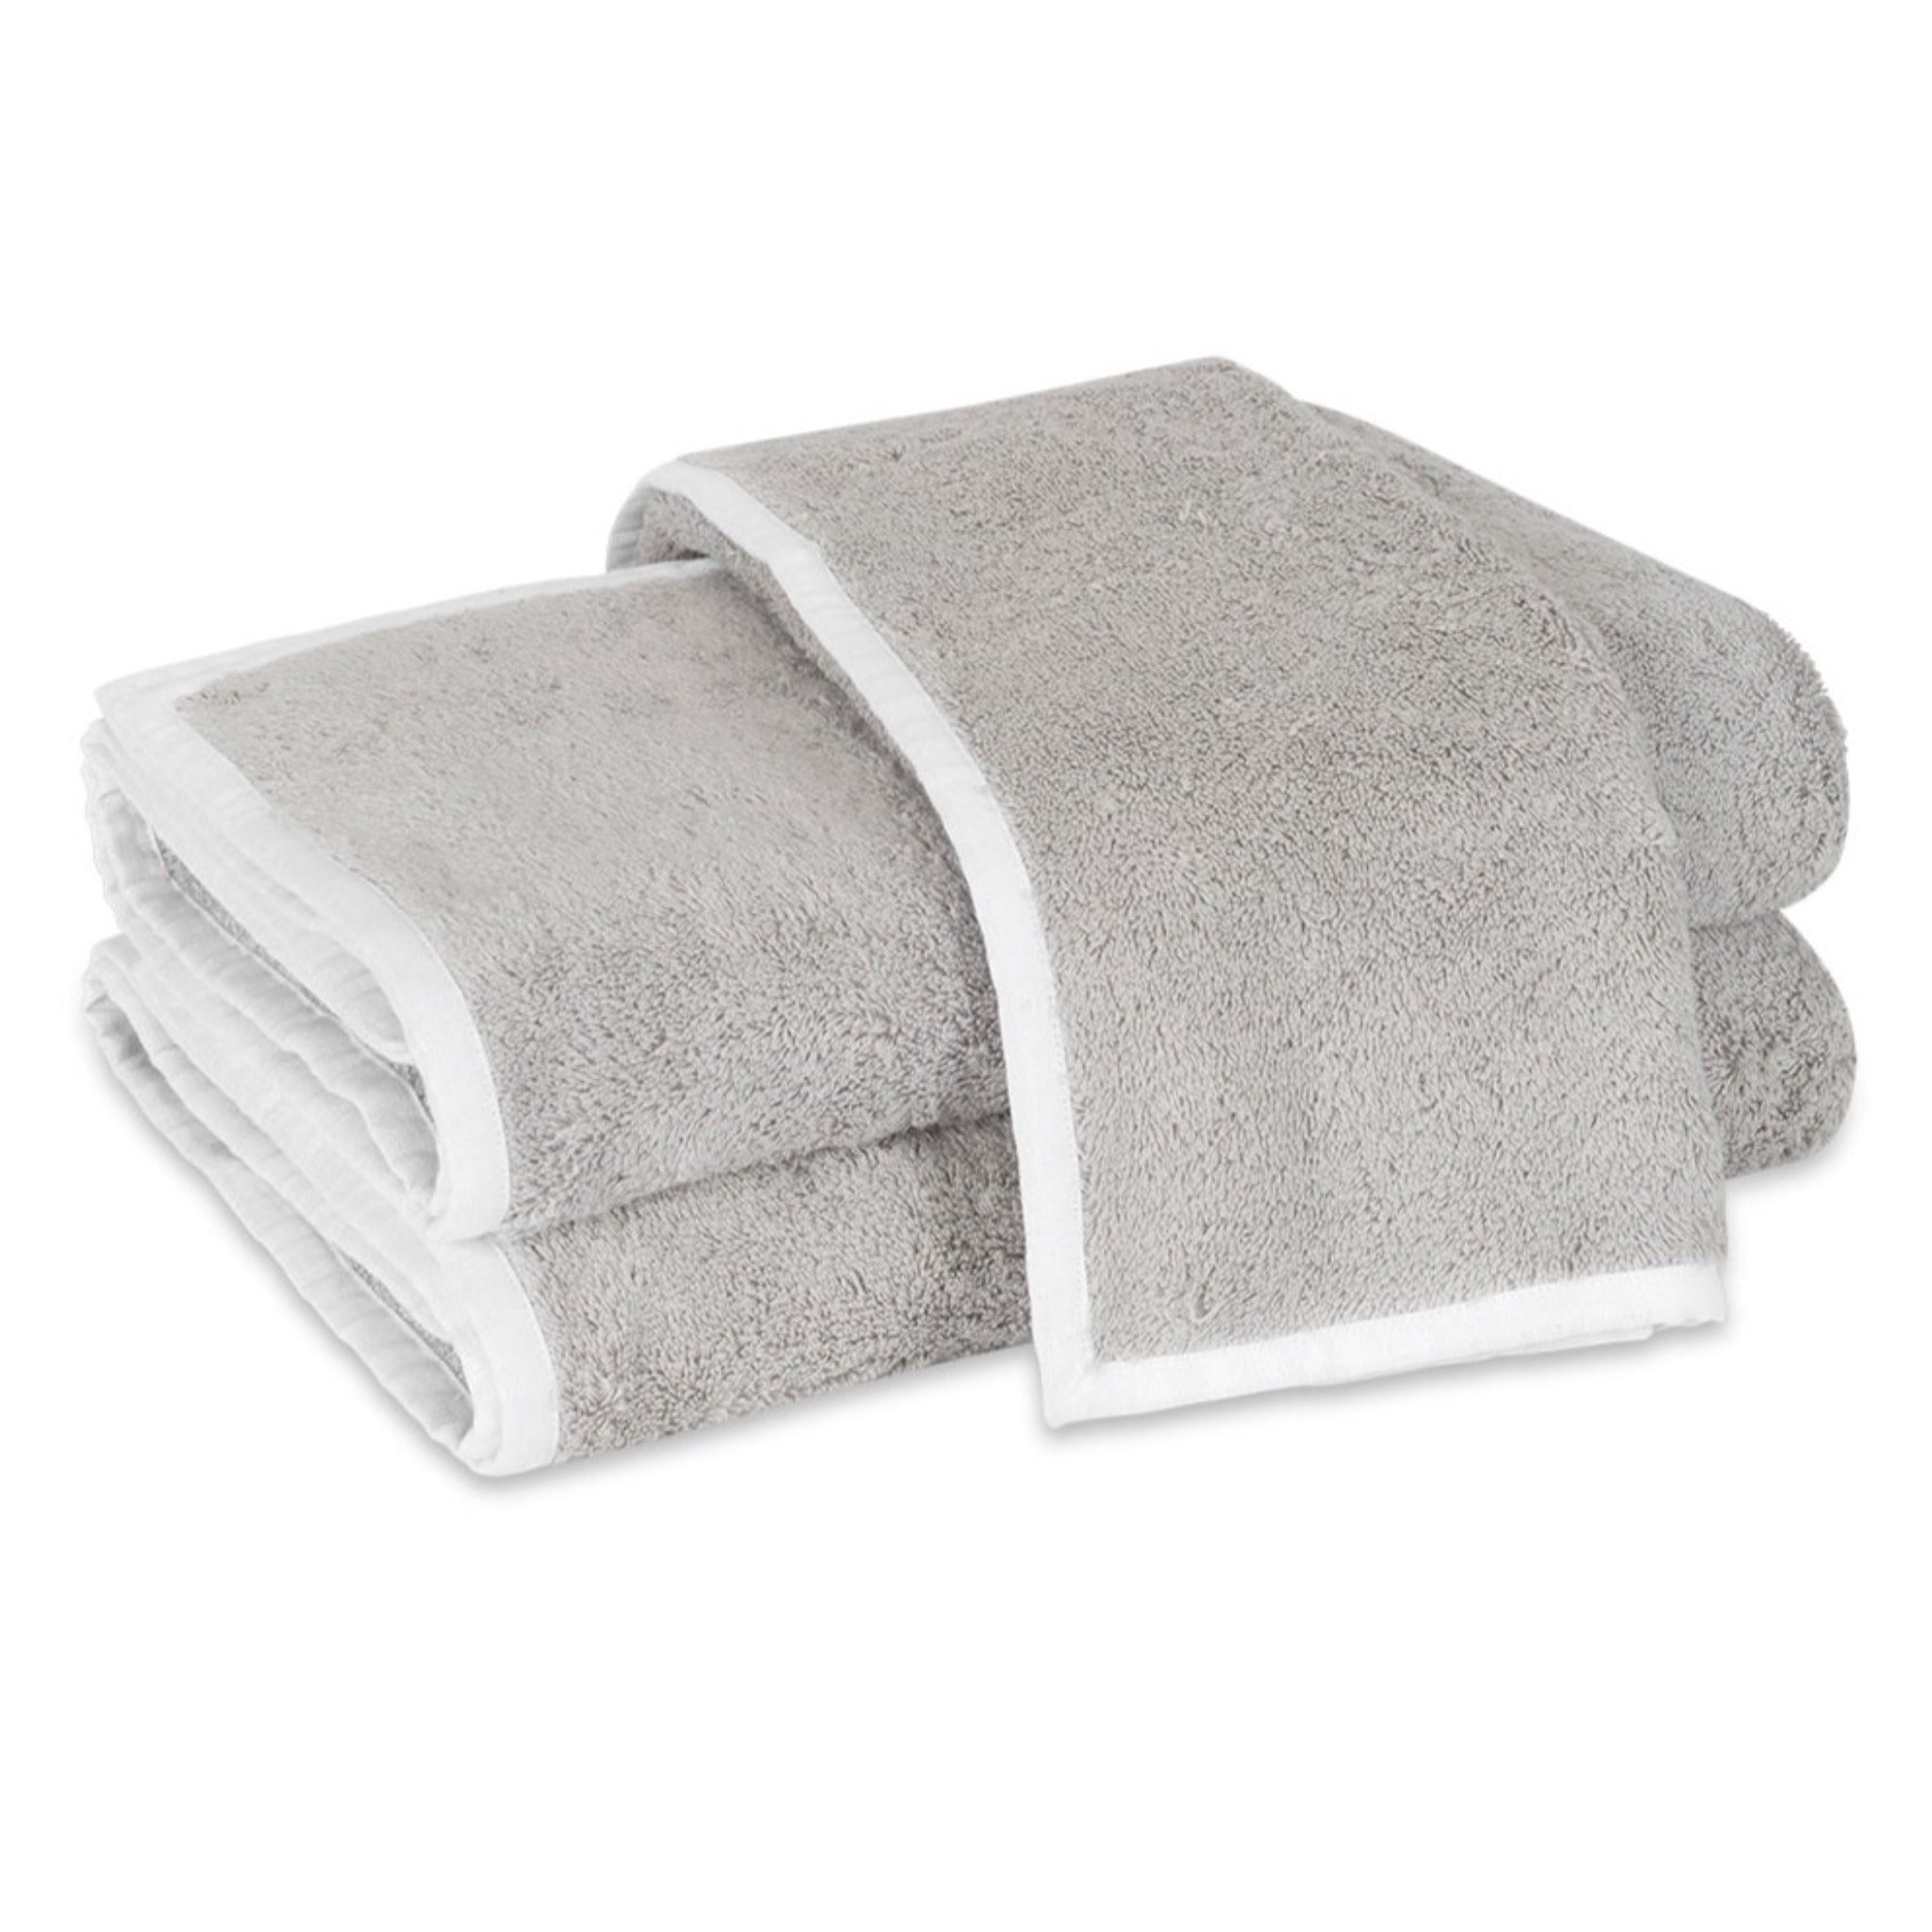 The White Company Luxury Egyptian Cotton Towel, Pearl Gray, Size: Face Cloth